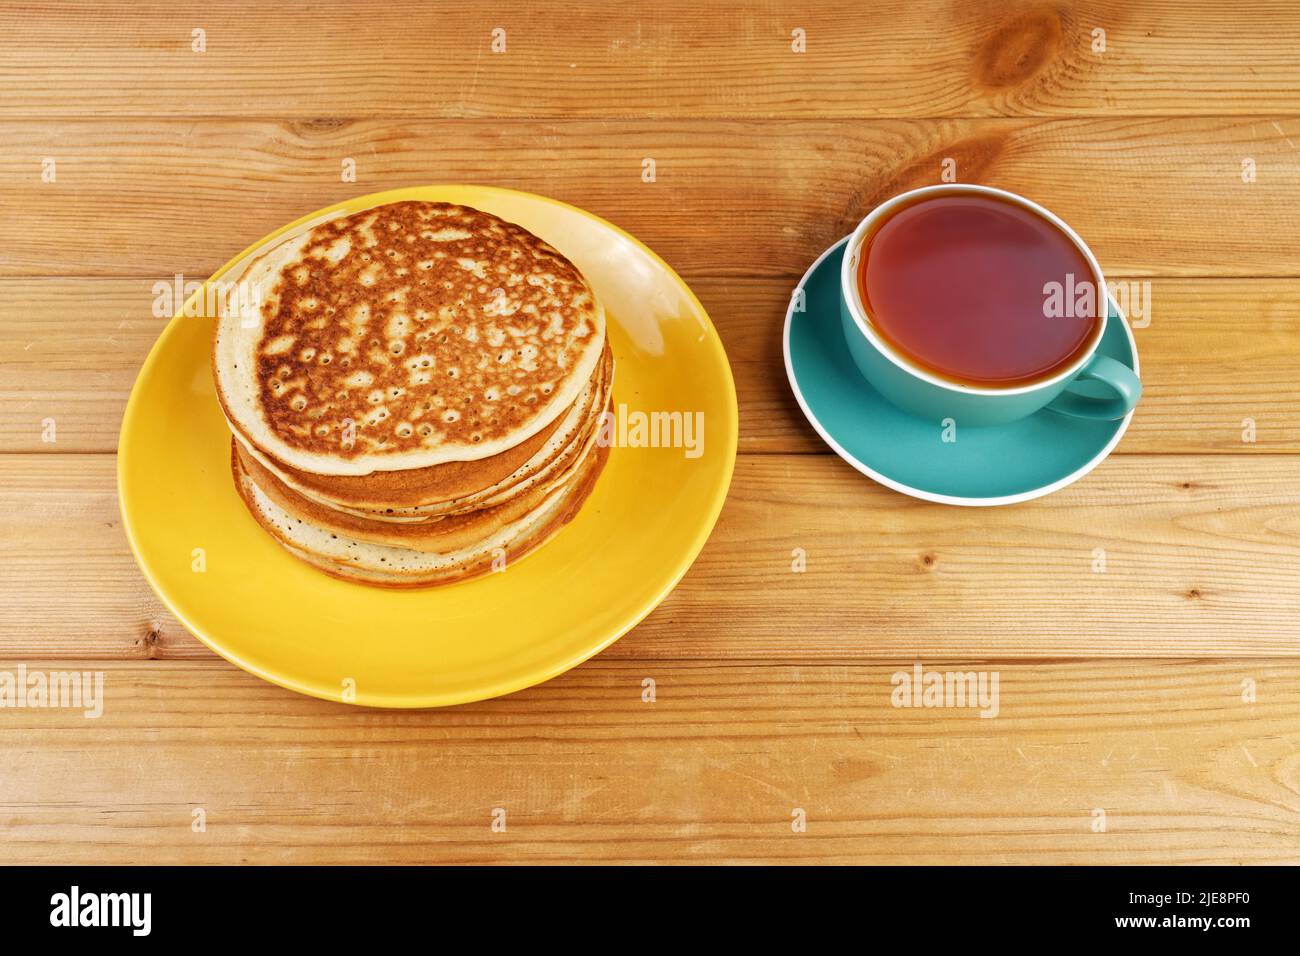 Homemade pancakes in a yellow plate and a cup of tea on a wooden table Stock Photo